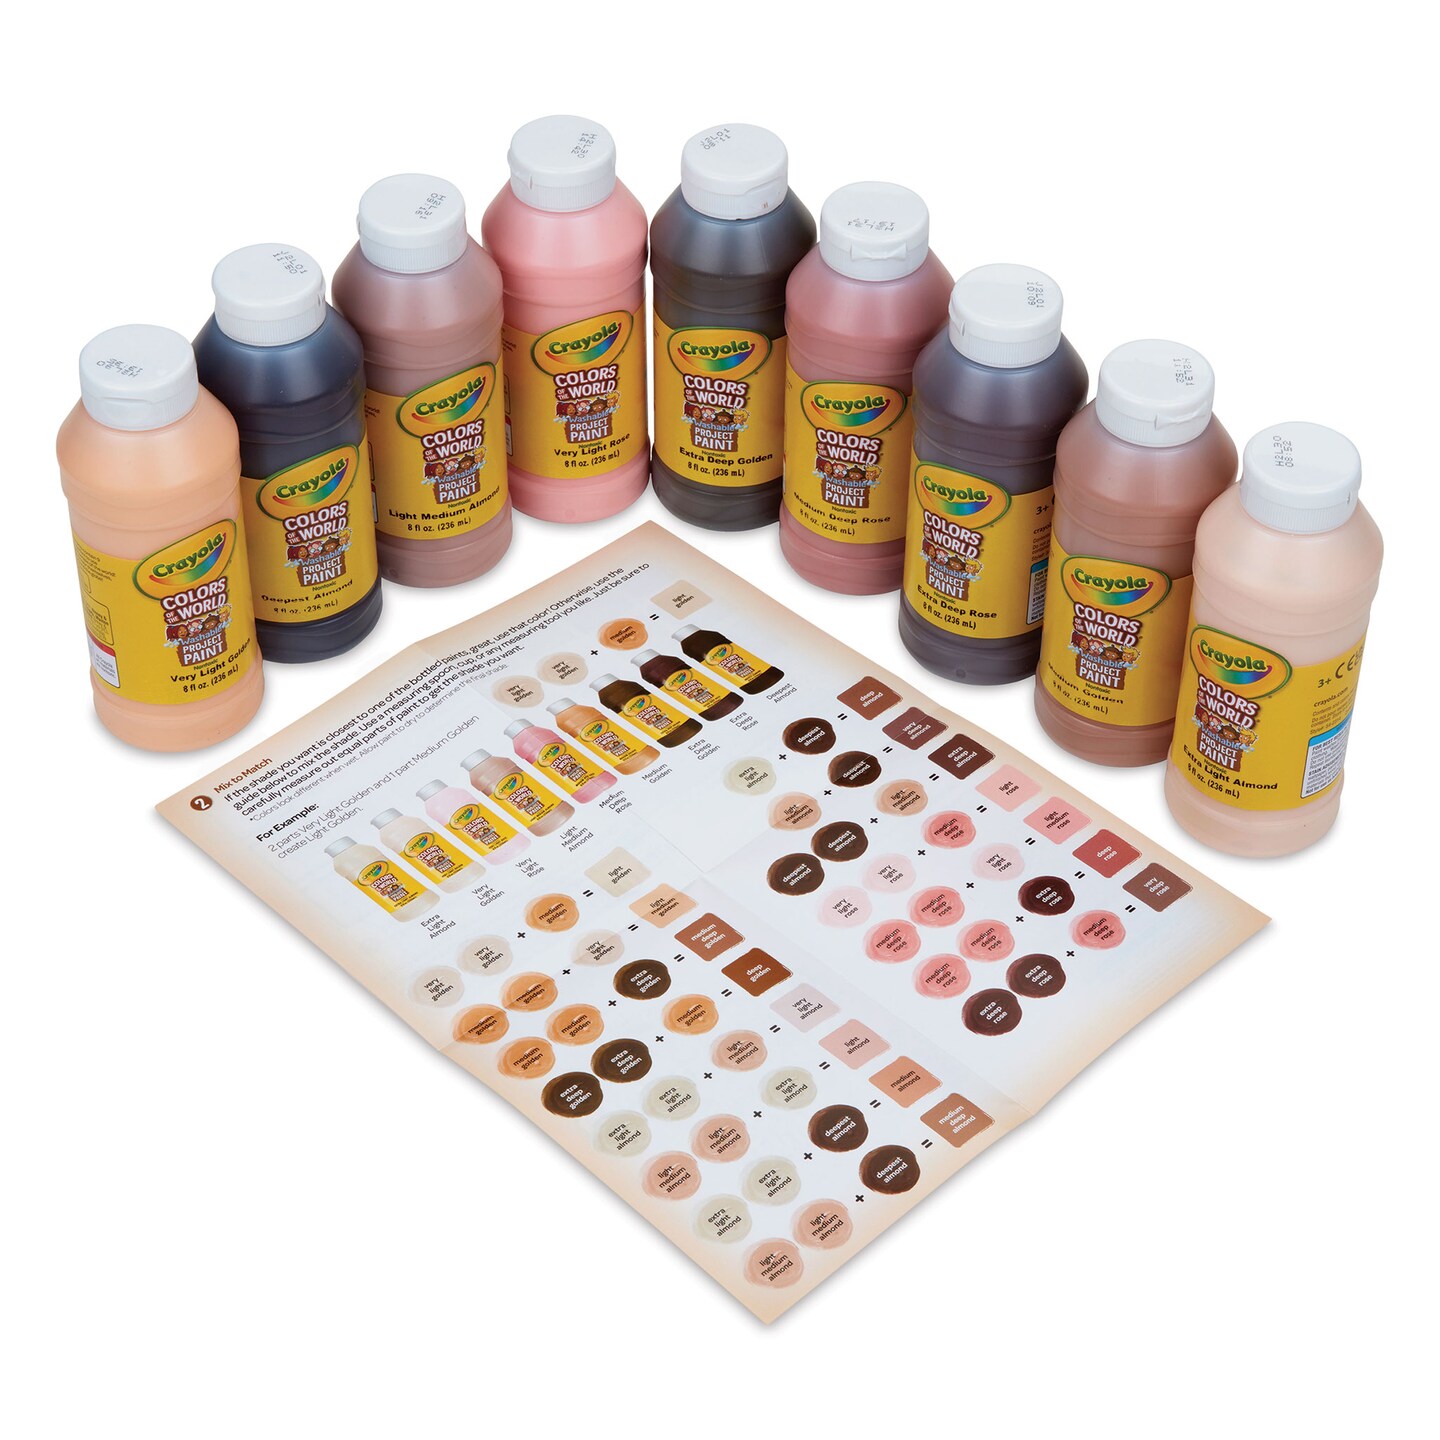 Crayola Colors of the World Washable Project Paint - Set of 9 colors, 8 oz Bottles